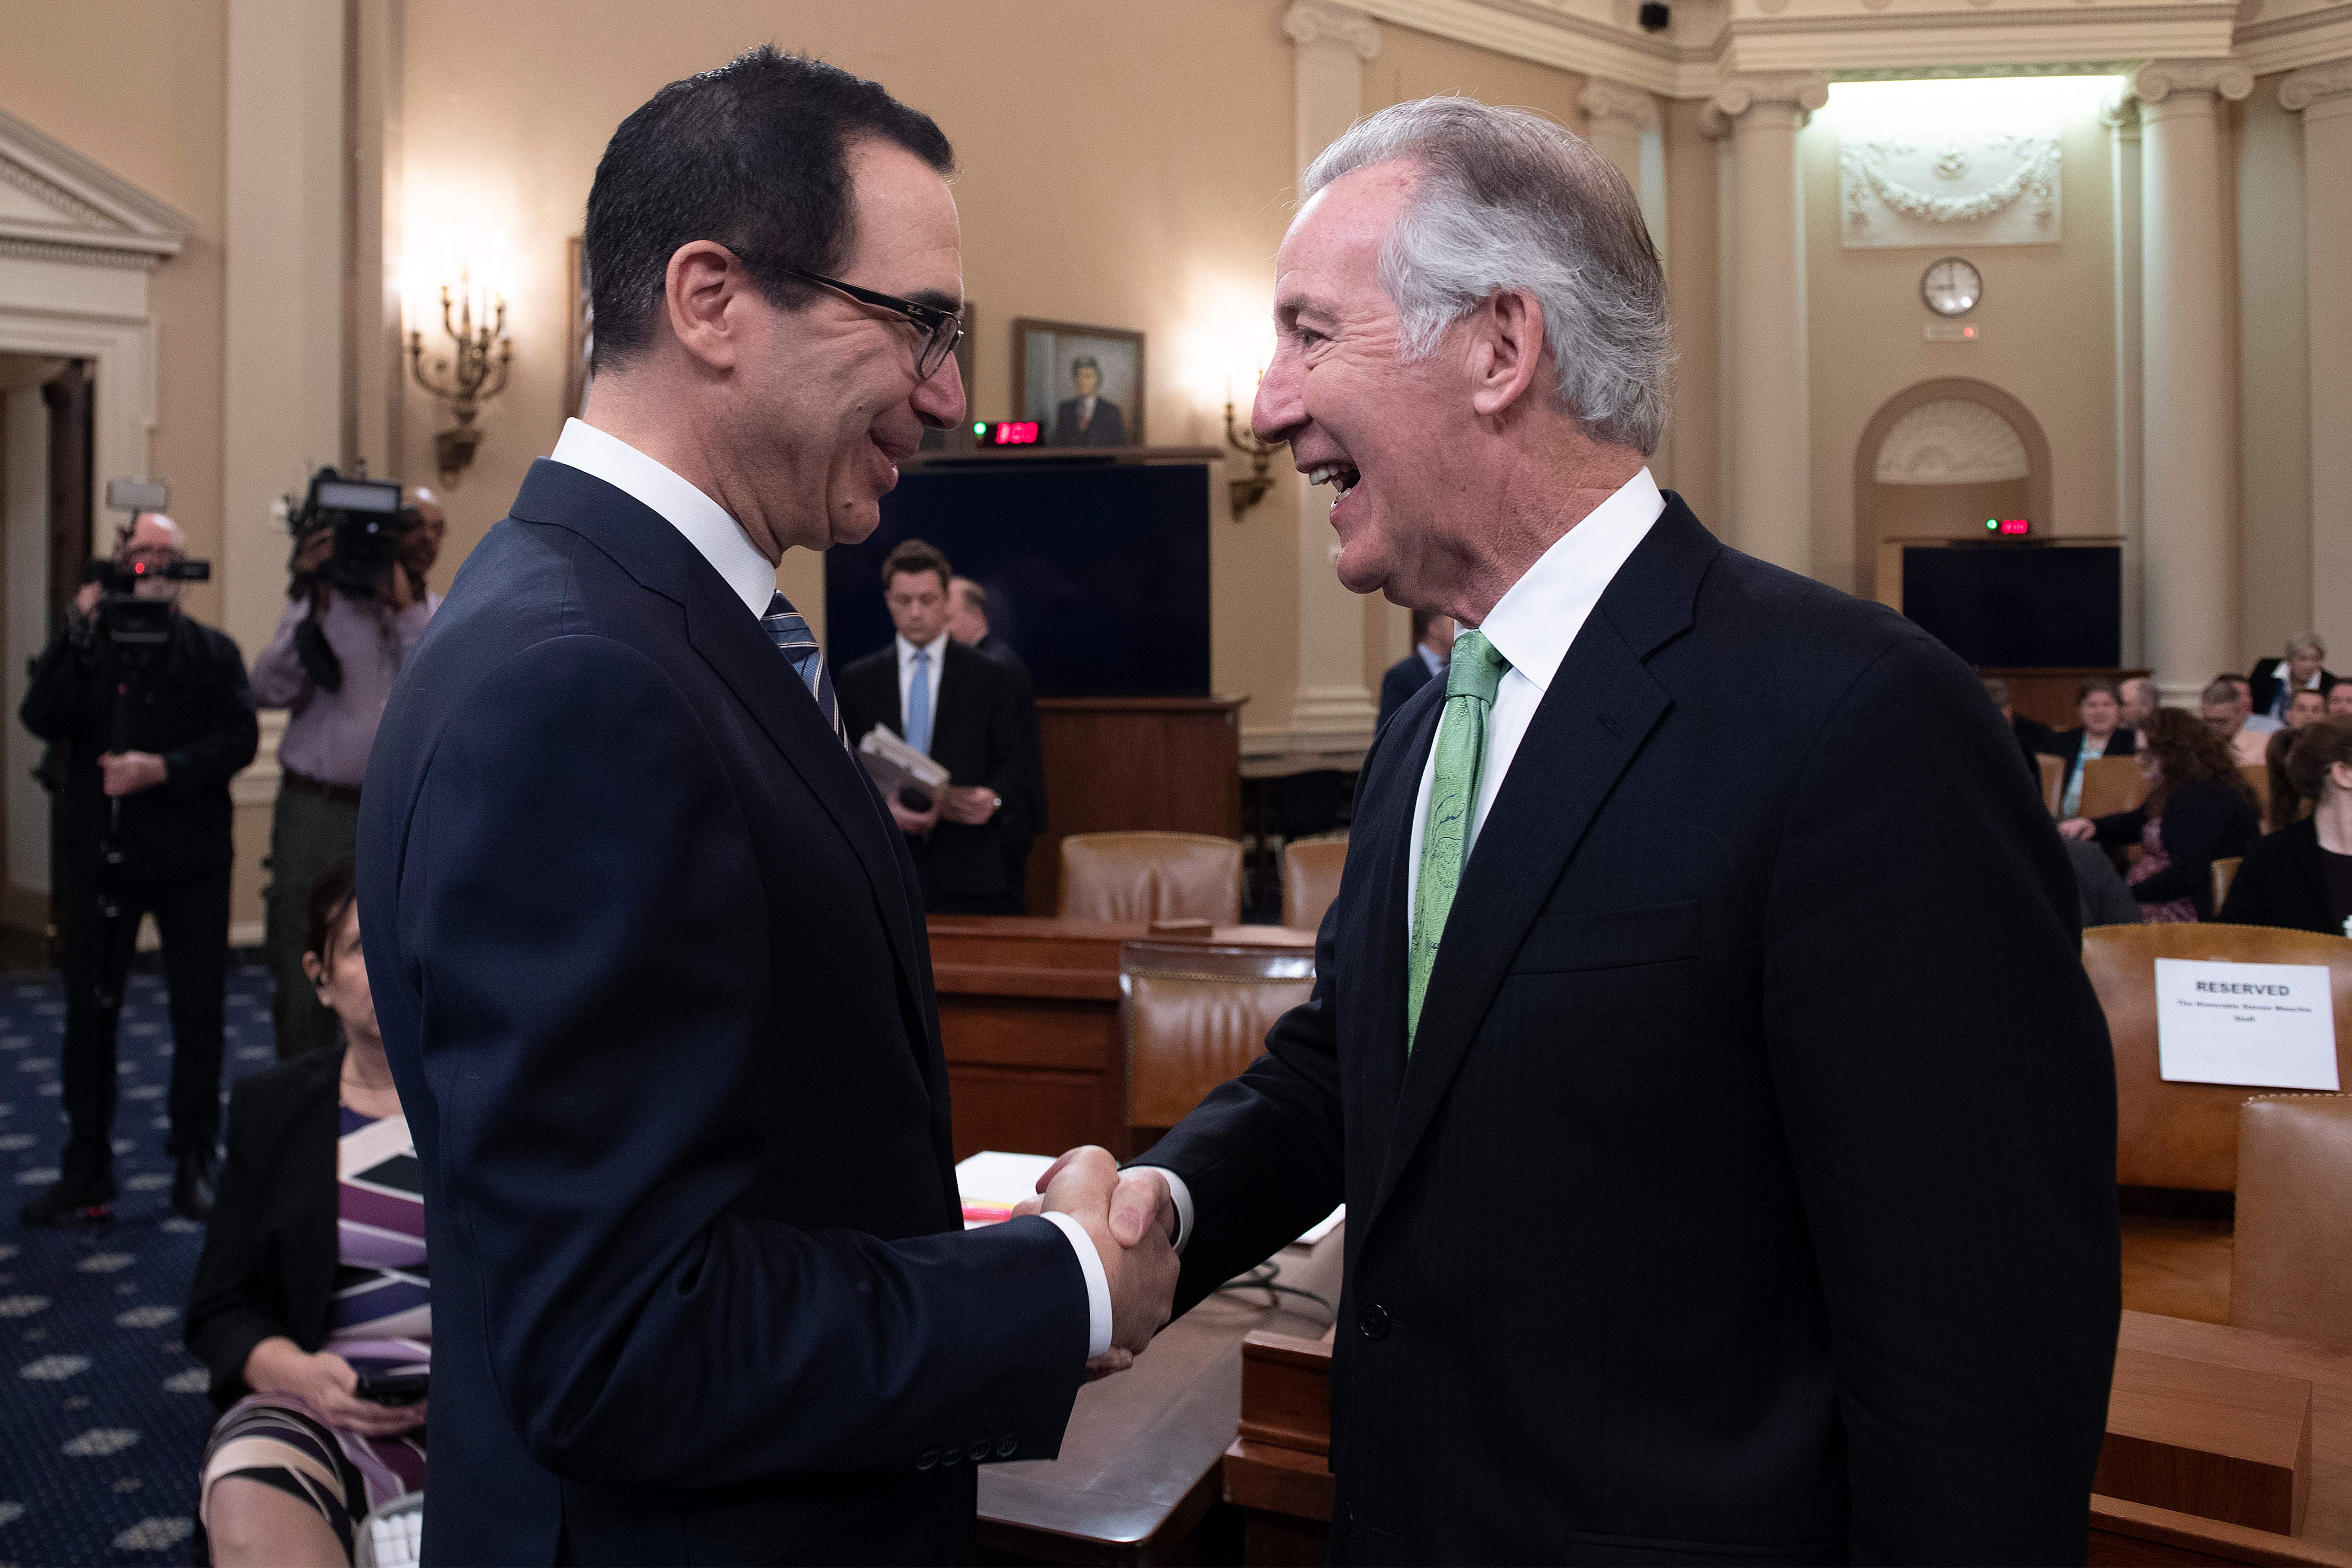 US Treasury Secretary Steven Mnuchin (L) shakes hands with Chairman of the House Ways and Means Committee, Richard Neal, prior to testifying on "The President's FY2020 Budget Proposal" before the House Ways and Means Committee on Capitol Hill in Washington, DC, on March 14, 2019. (Photo by Jim WATSON / AFP) (Photo by JIM WATSON/AFP/Getty Images)